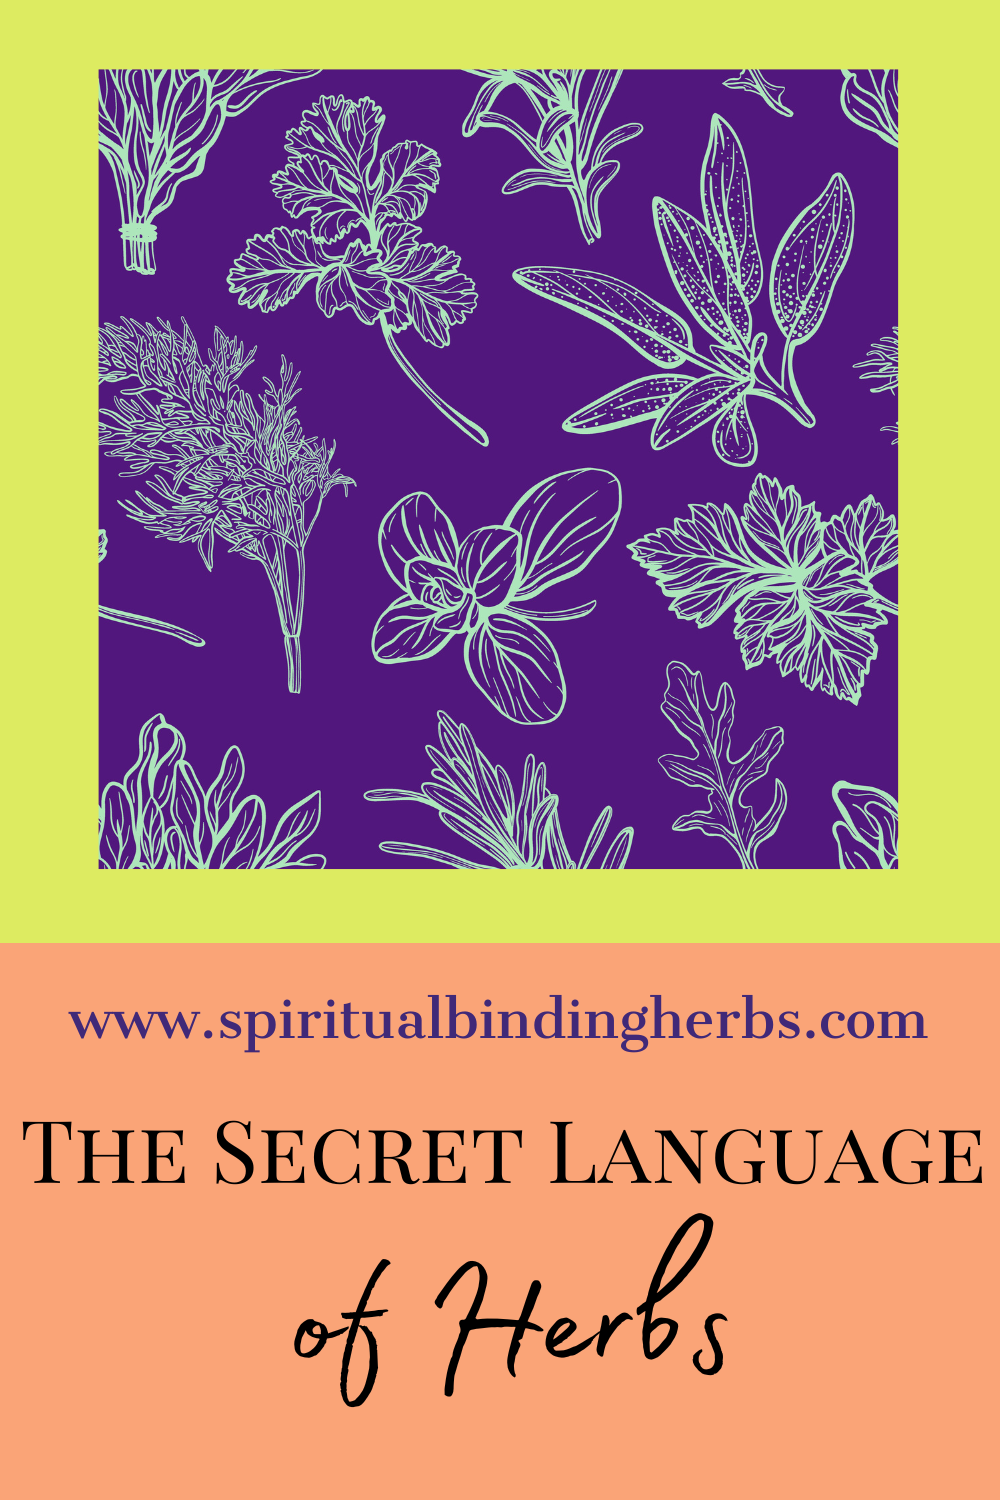 How Is The Secret Language of Herbs by Alice Peck